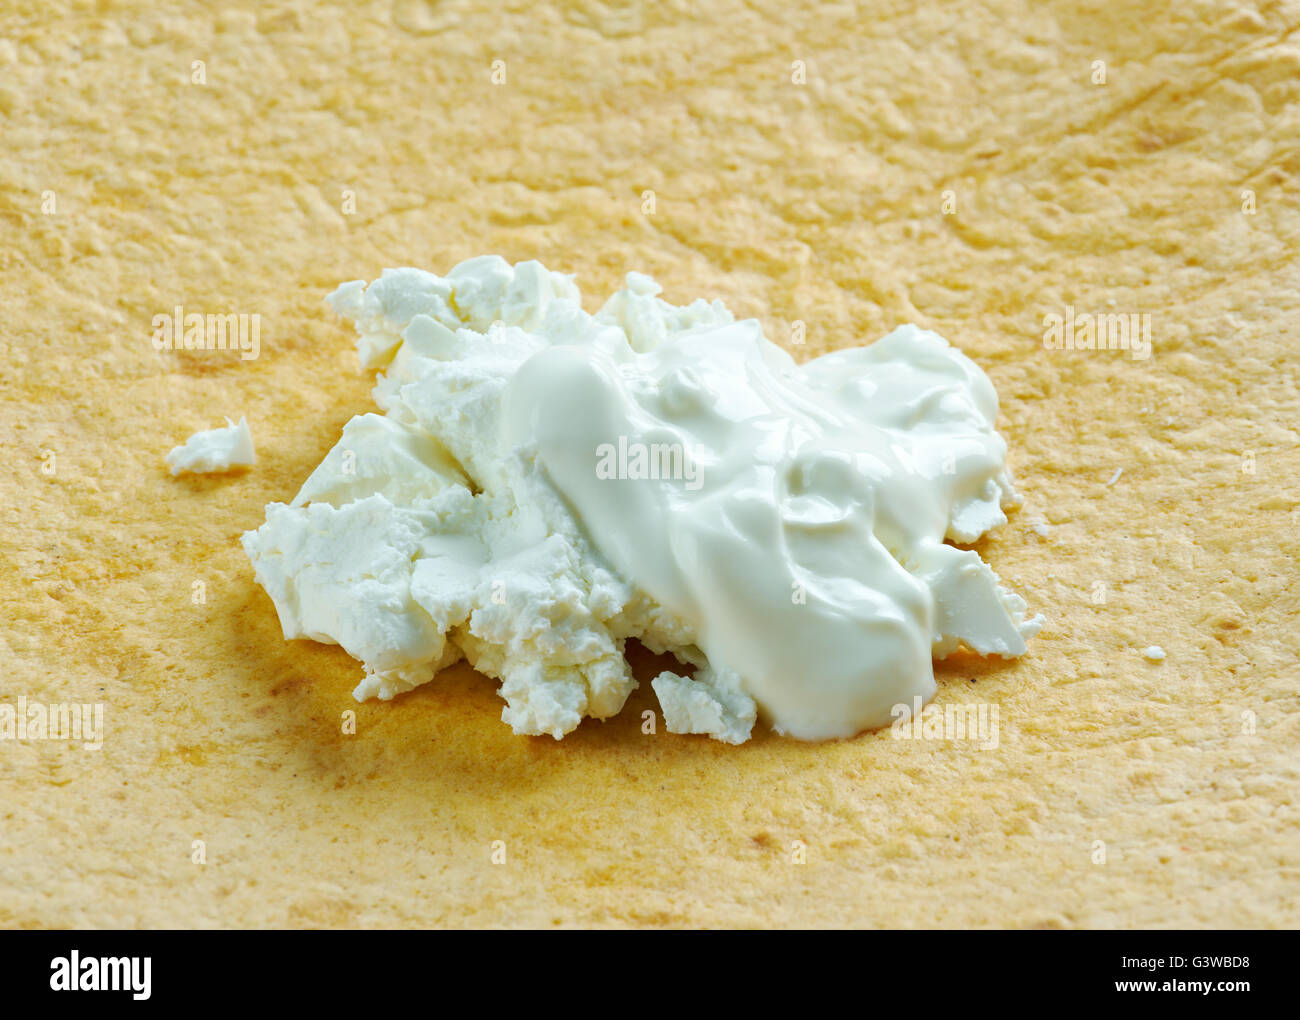 Guirila - tortilla made from young white corn. thick, sweet, filling, and usually eaten with crumbled white cheese. Stock Photo